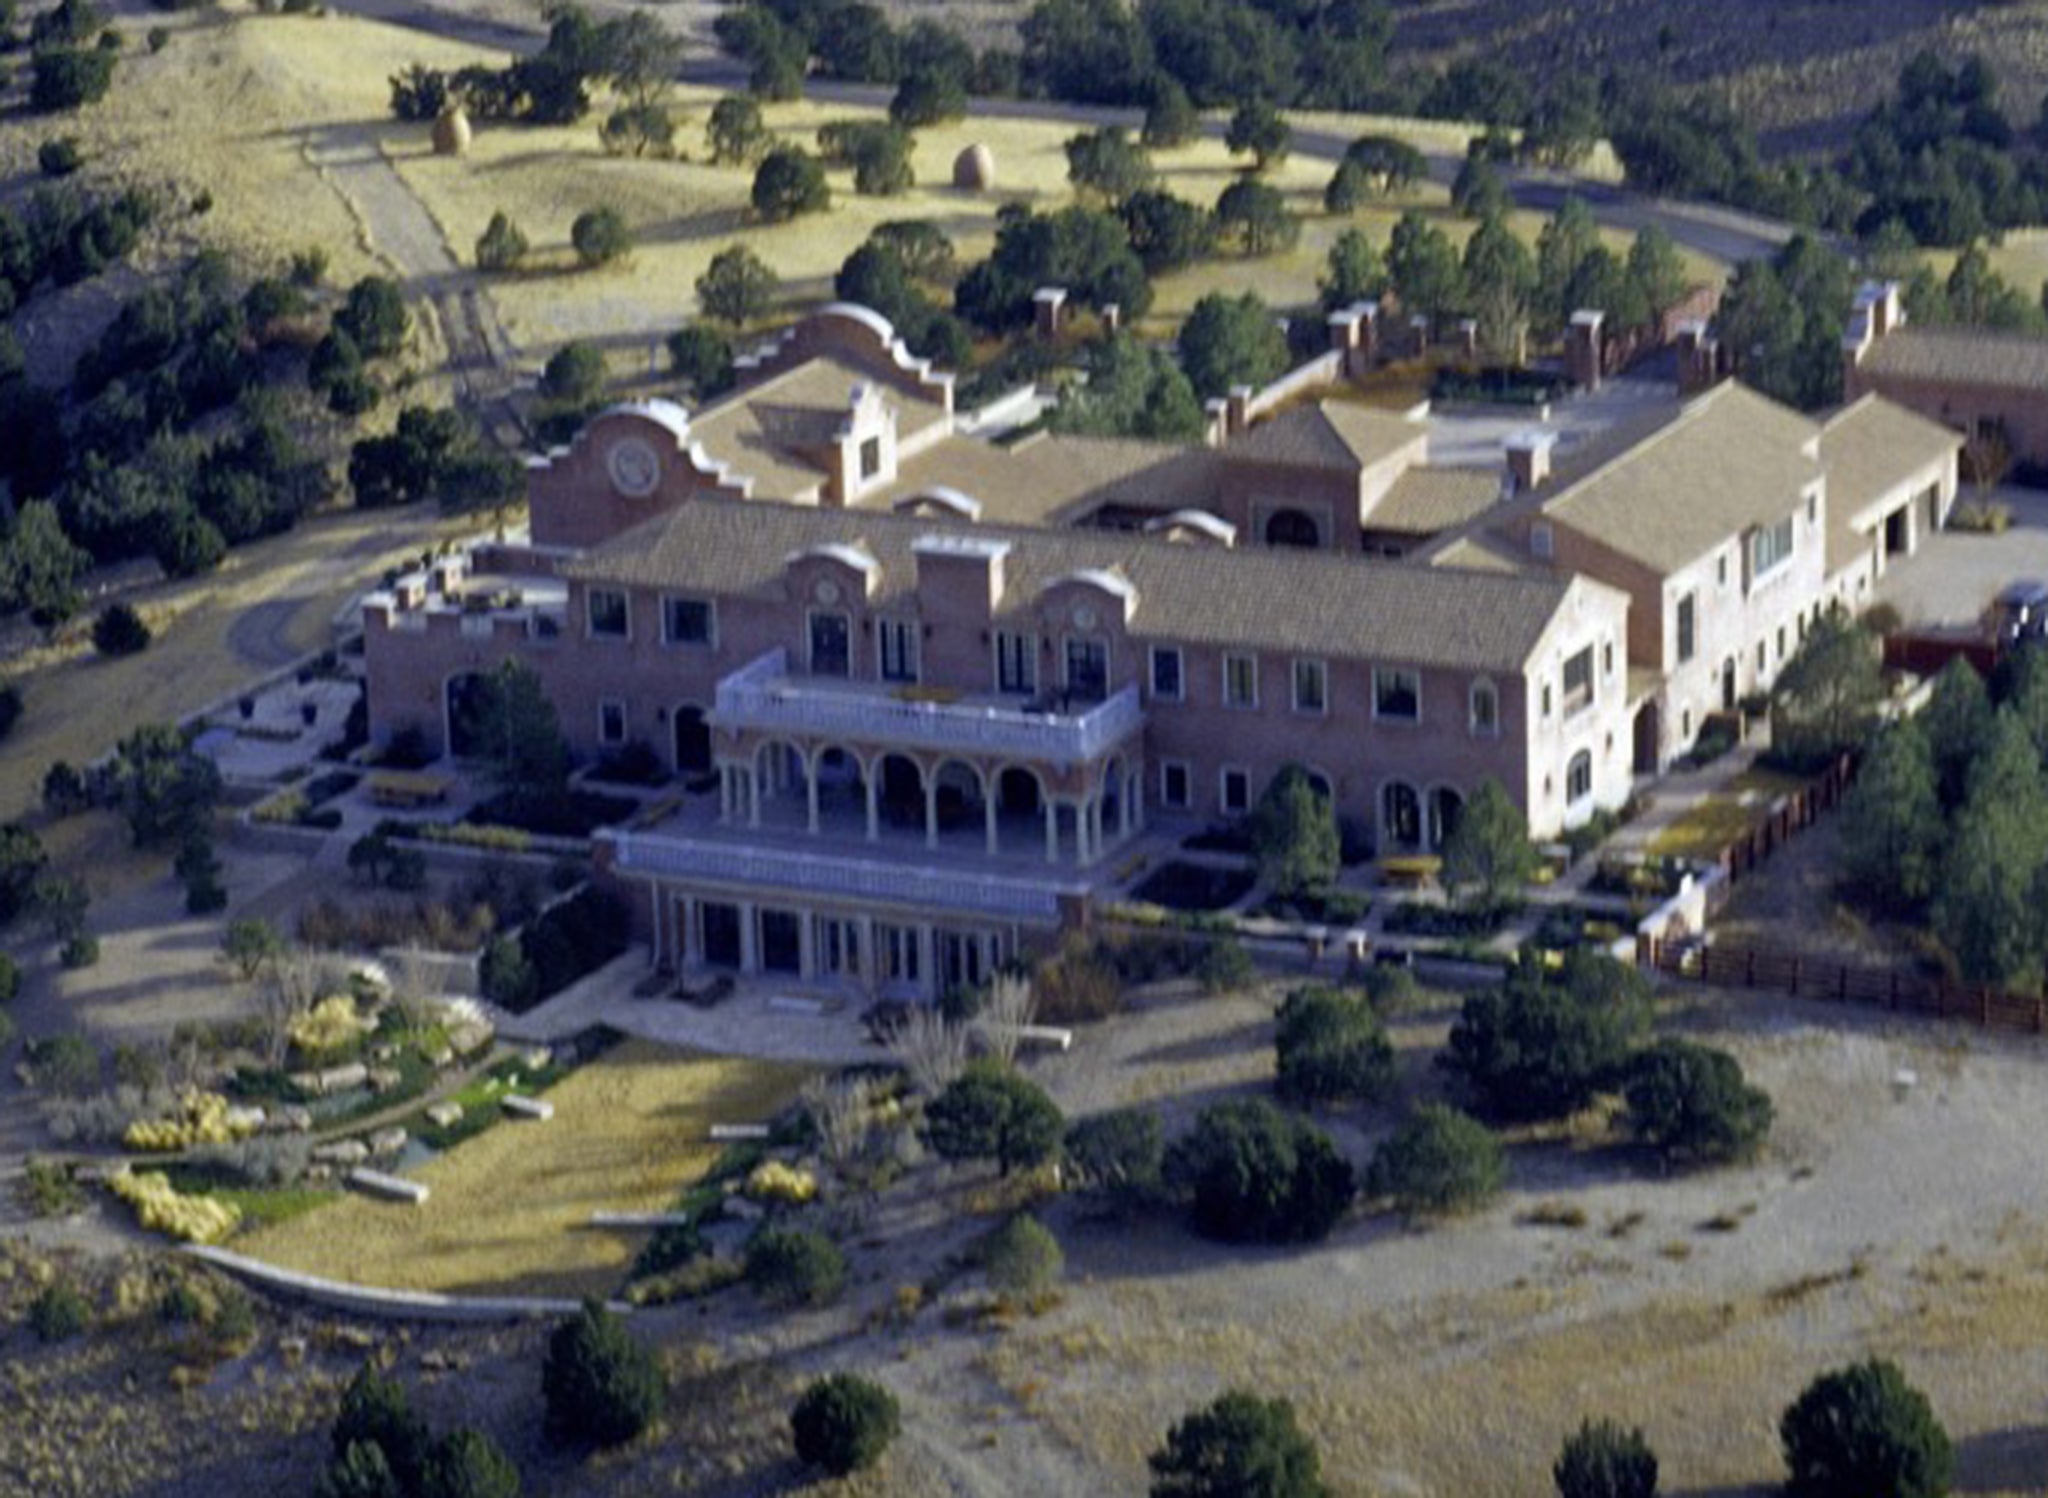 Jeffrey Epstein’s ‘Zorro Ranch’ in New Mexico that was used by the disgraced financier to allegedly traffic underage girls